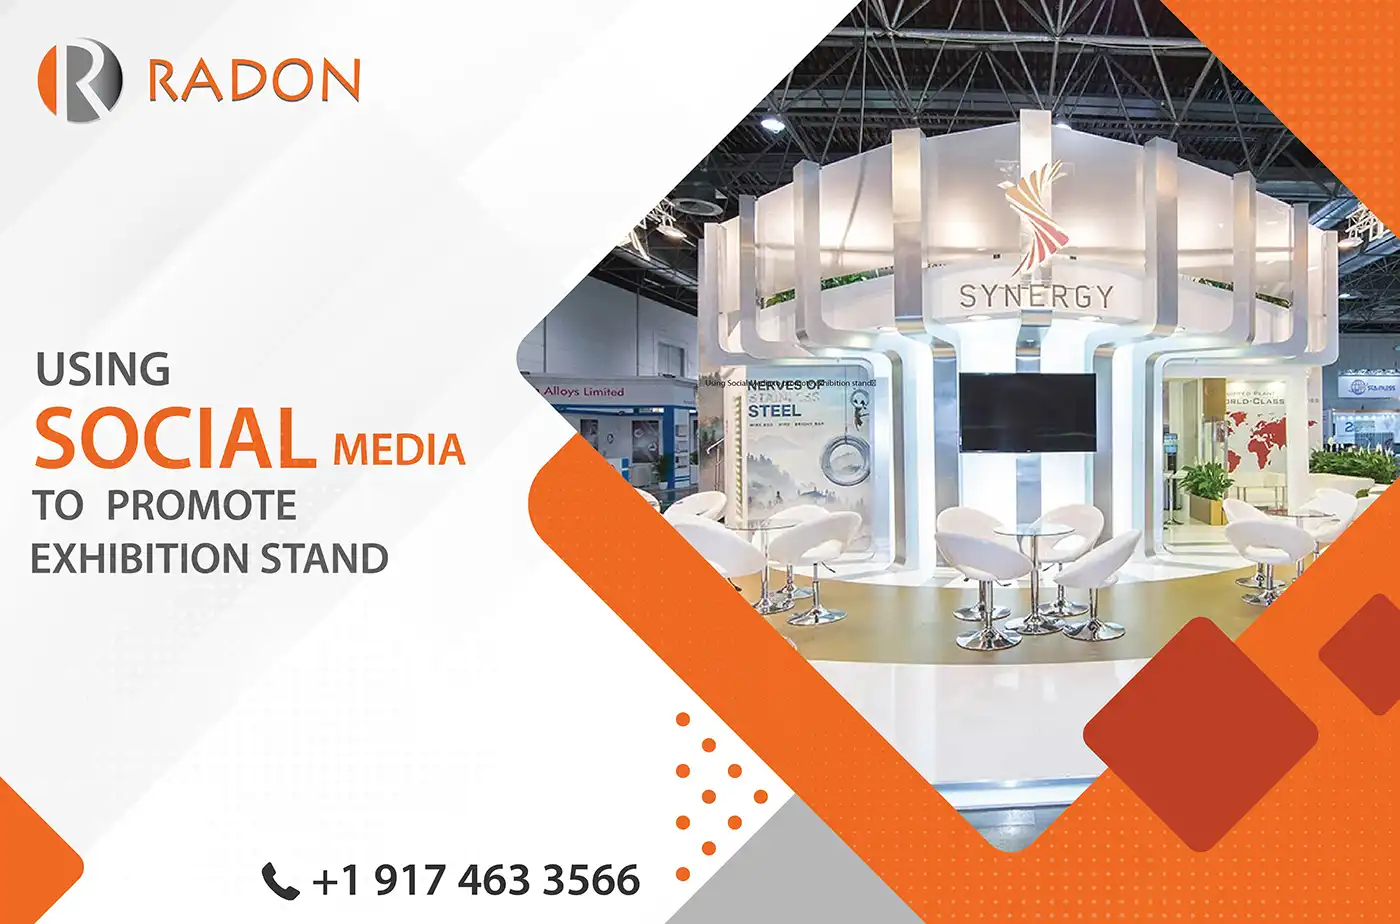 Using Social Media to promote exhibition stand